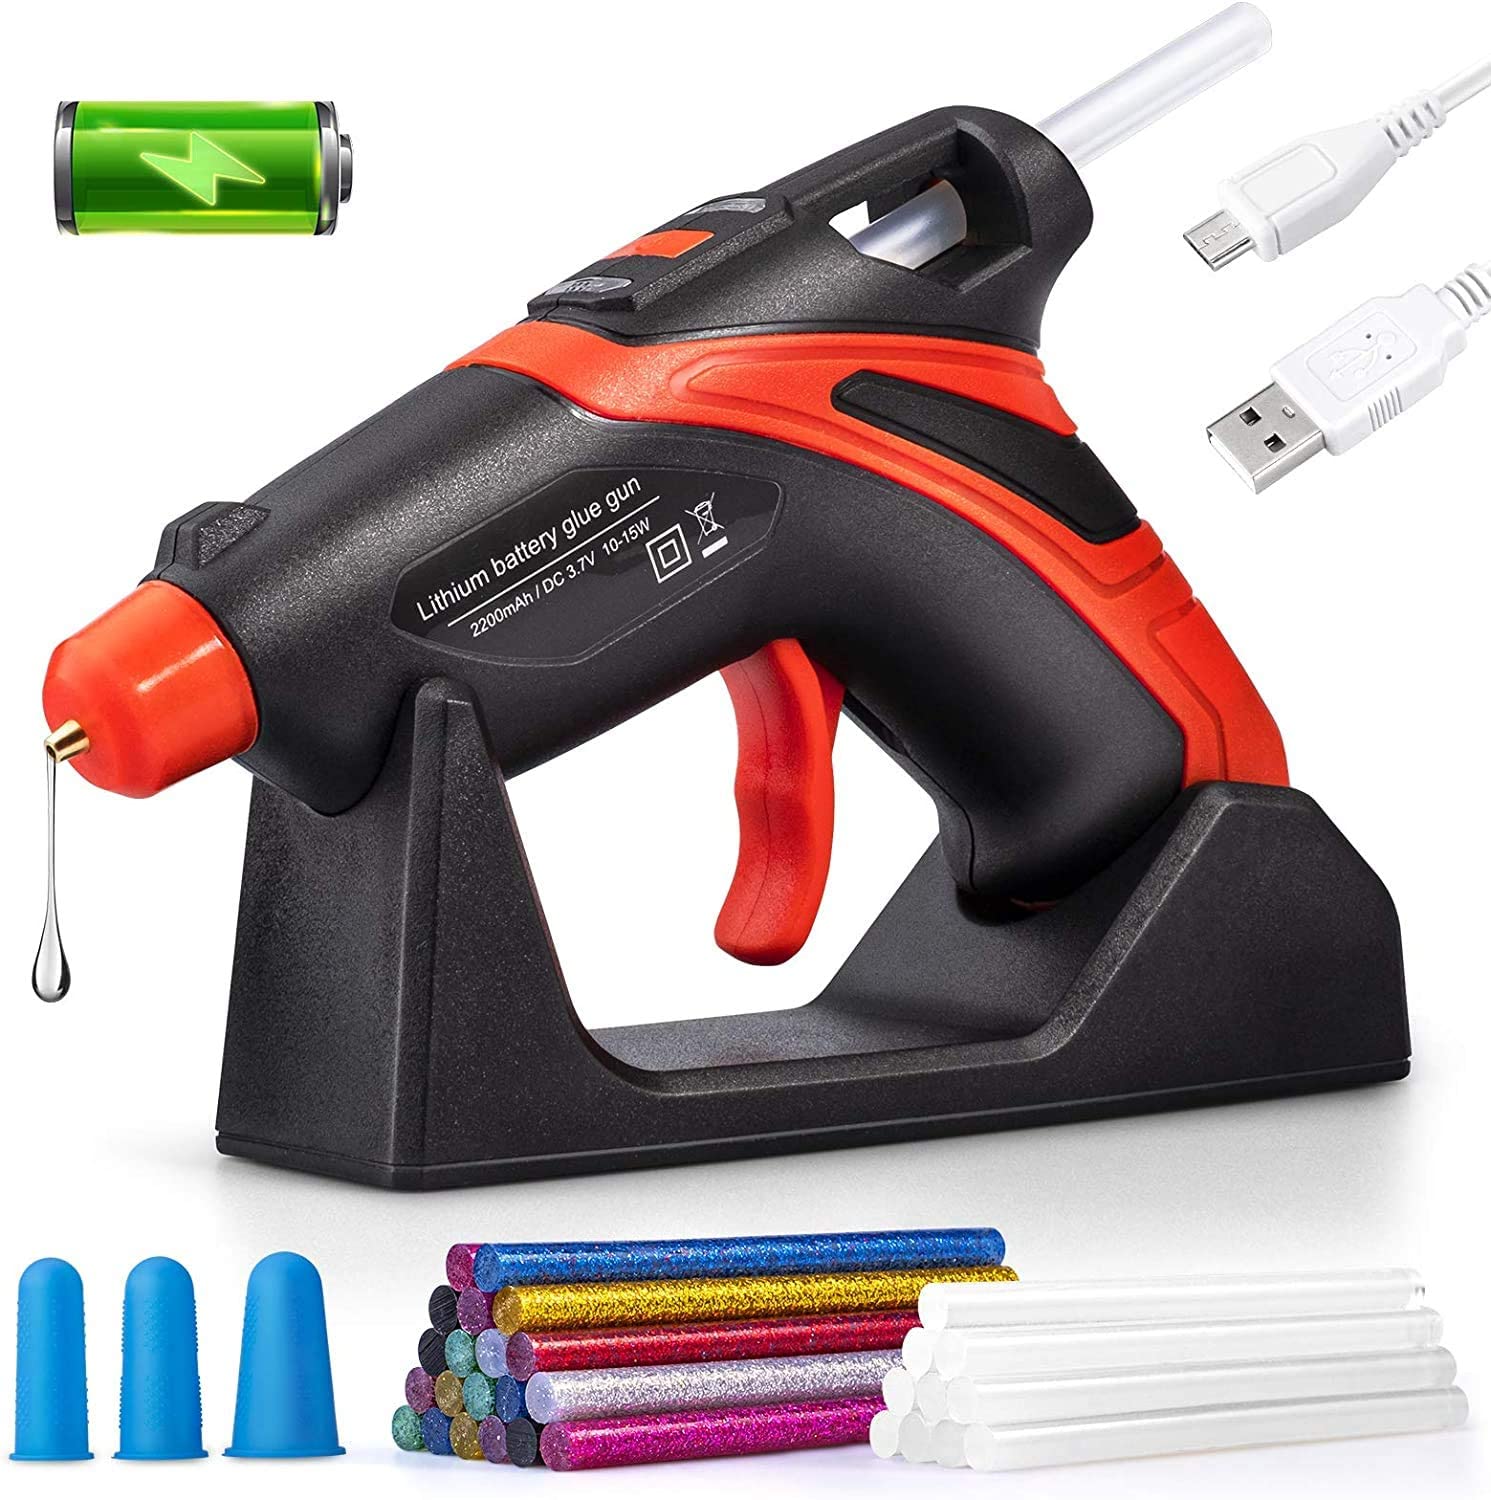 Cordless Hot Glue Gun Fast Preheating Gun Kit with 30 Pcs Sticks USB  Rechargeable Melt Tools for Quick Home Repairs Arts Crafts DIY and Festival  Decorations